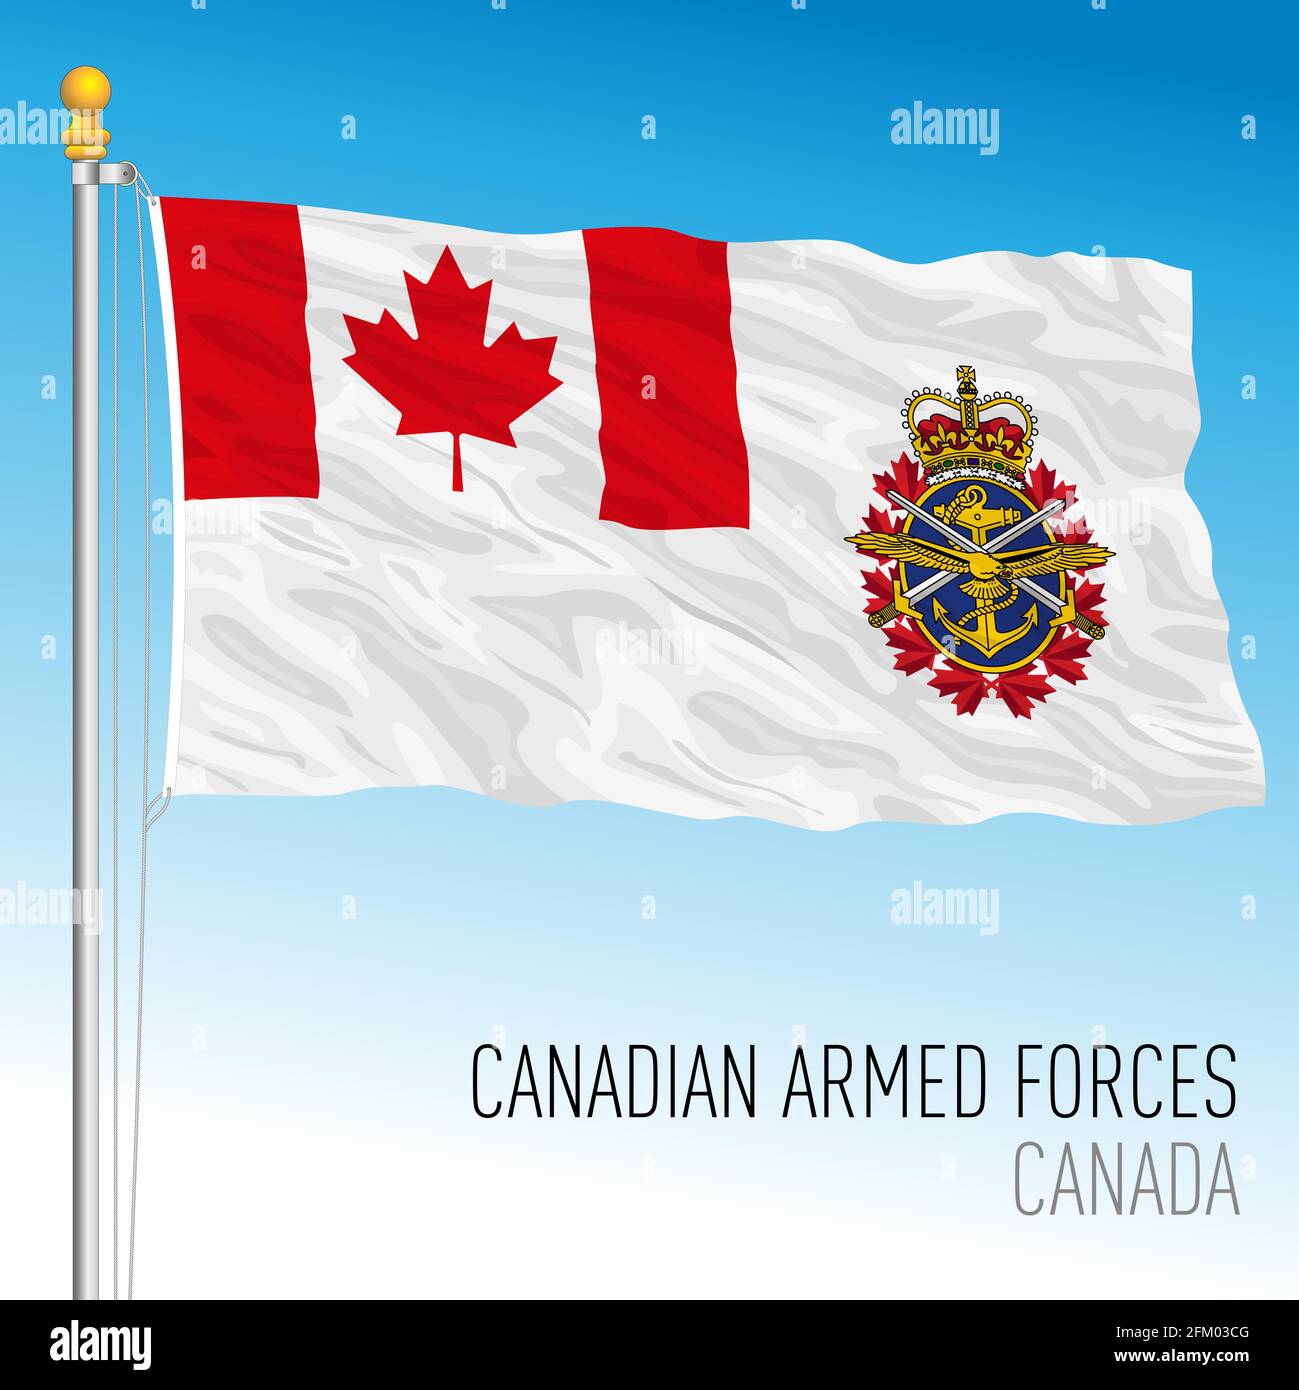 Canadian Armed Forces flag, Canada, north american country, vector illustration Stock Vector